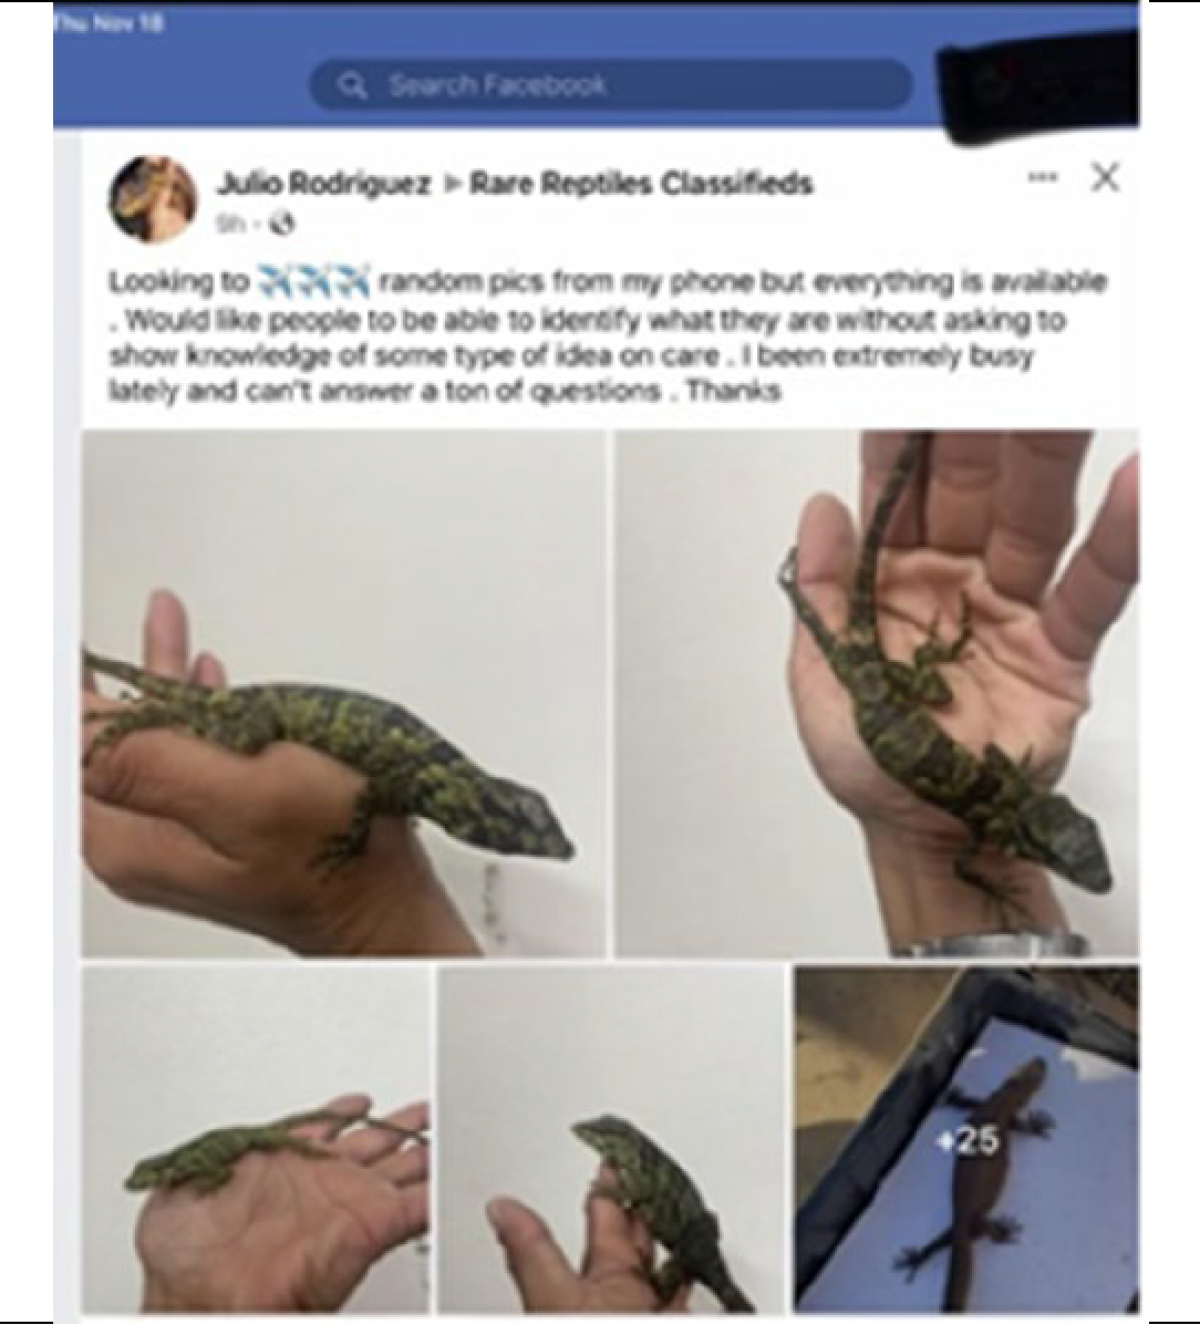 A Facebook ad shows lizards for sale by Julio Rodriguez, who investigators say is Jose Manuel Perez.